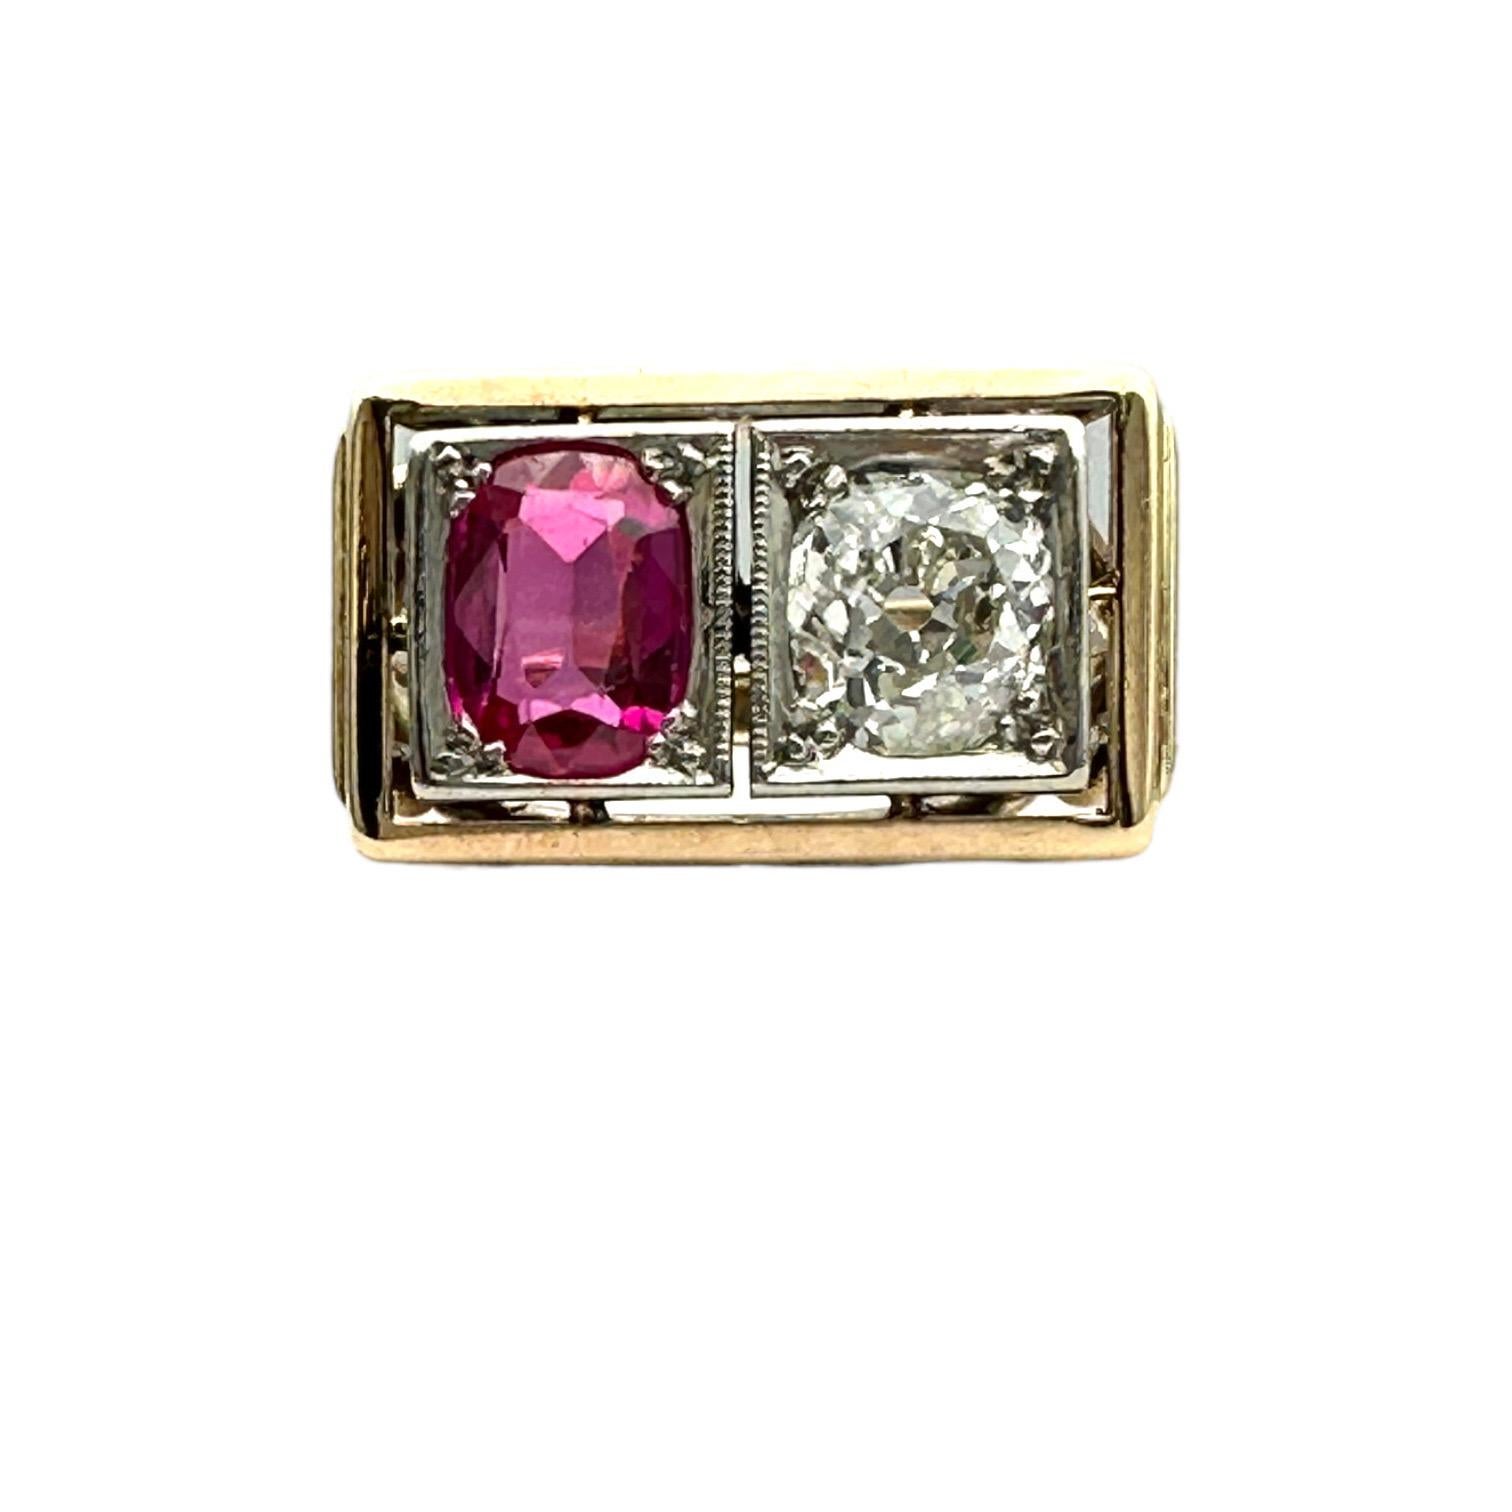 1800's Art Deco Old Miners Cut Diamond & Ruby 2.20 Carat Ring For Sale 5